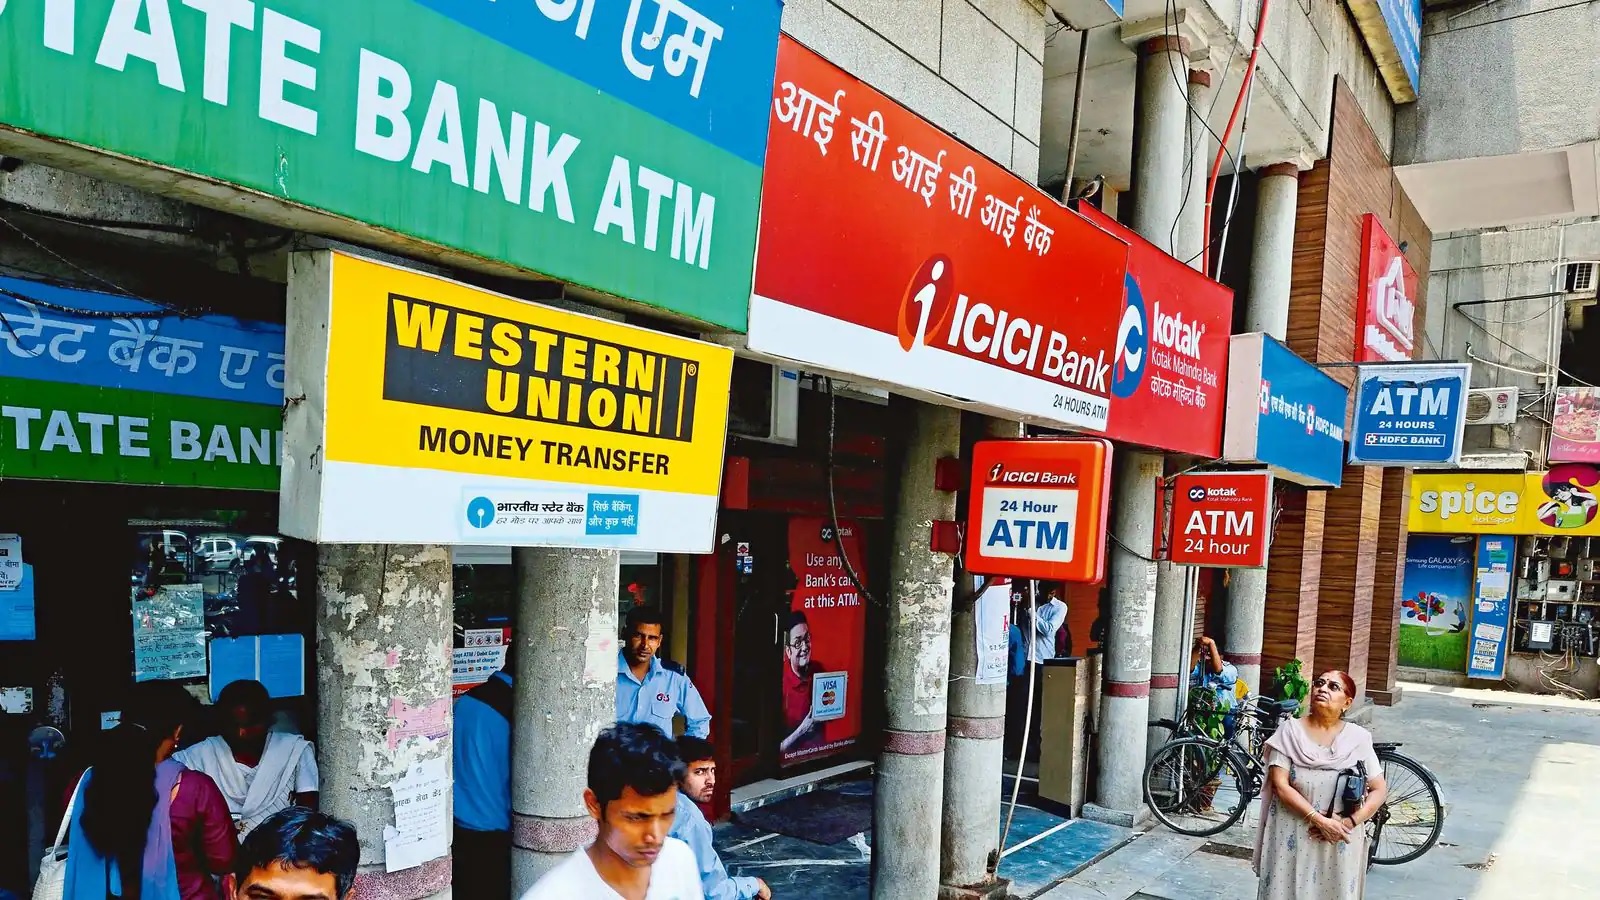 Highest Interest Rate: These 5 banks are giving highest interest rate on savings account , see bank list here